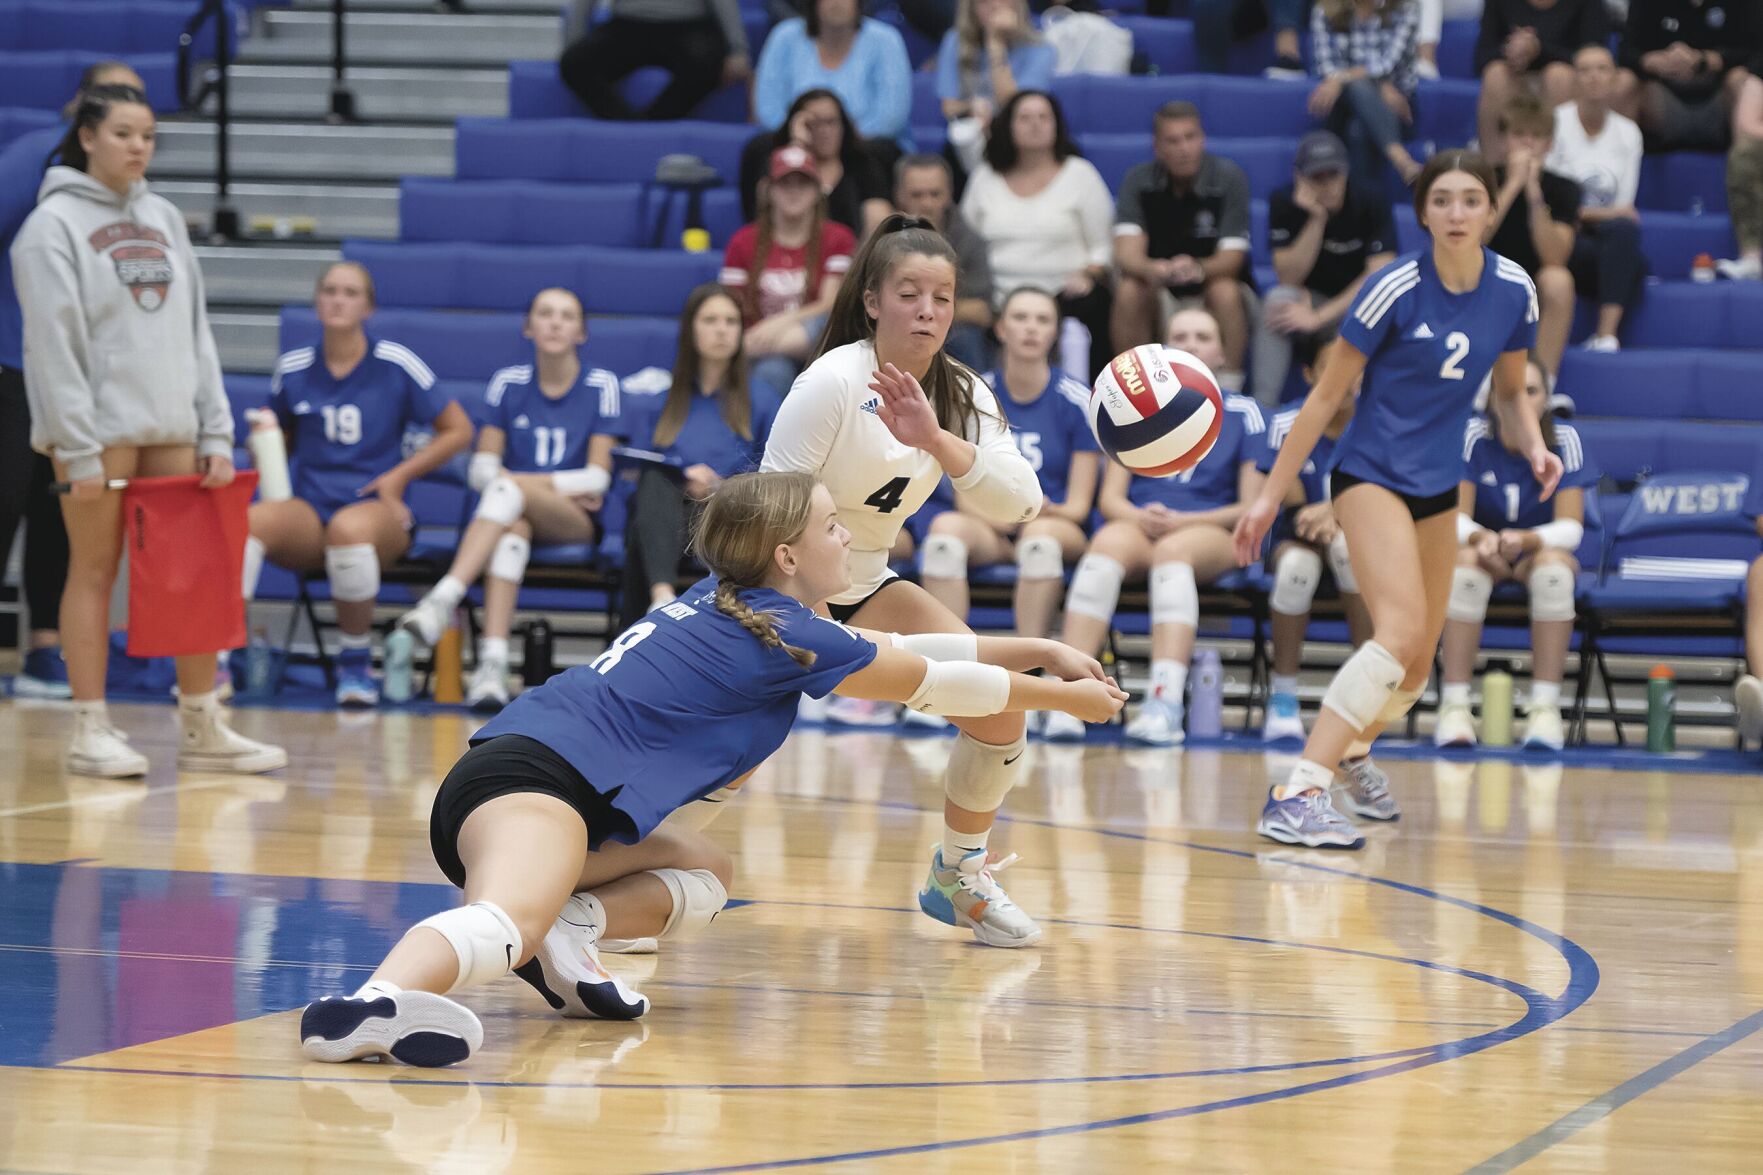 Waukesha West Girls Volleyball Team aims to establish itself as one of Wisconsin’s best programs